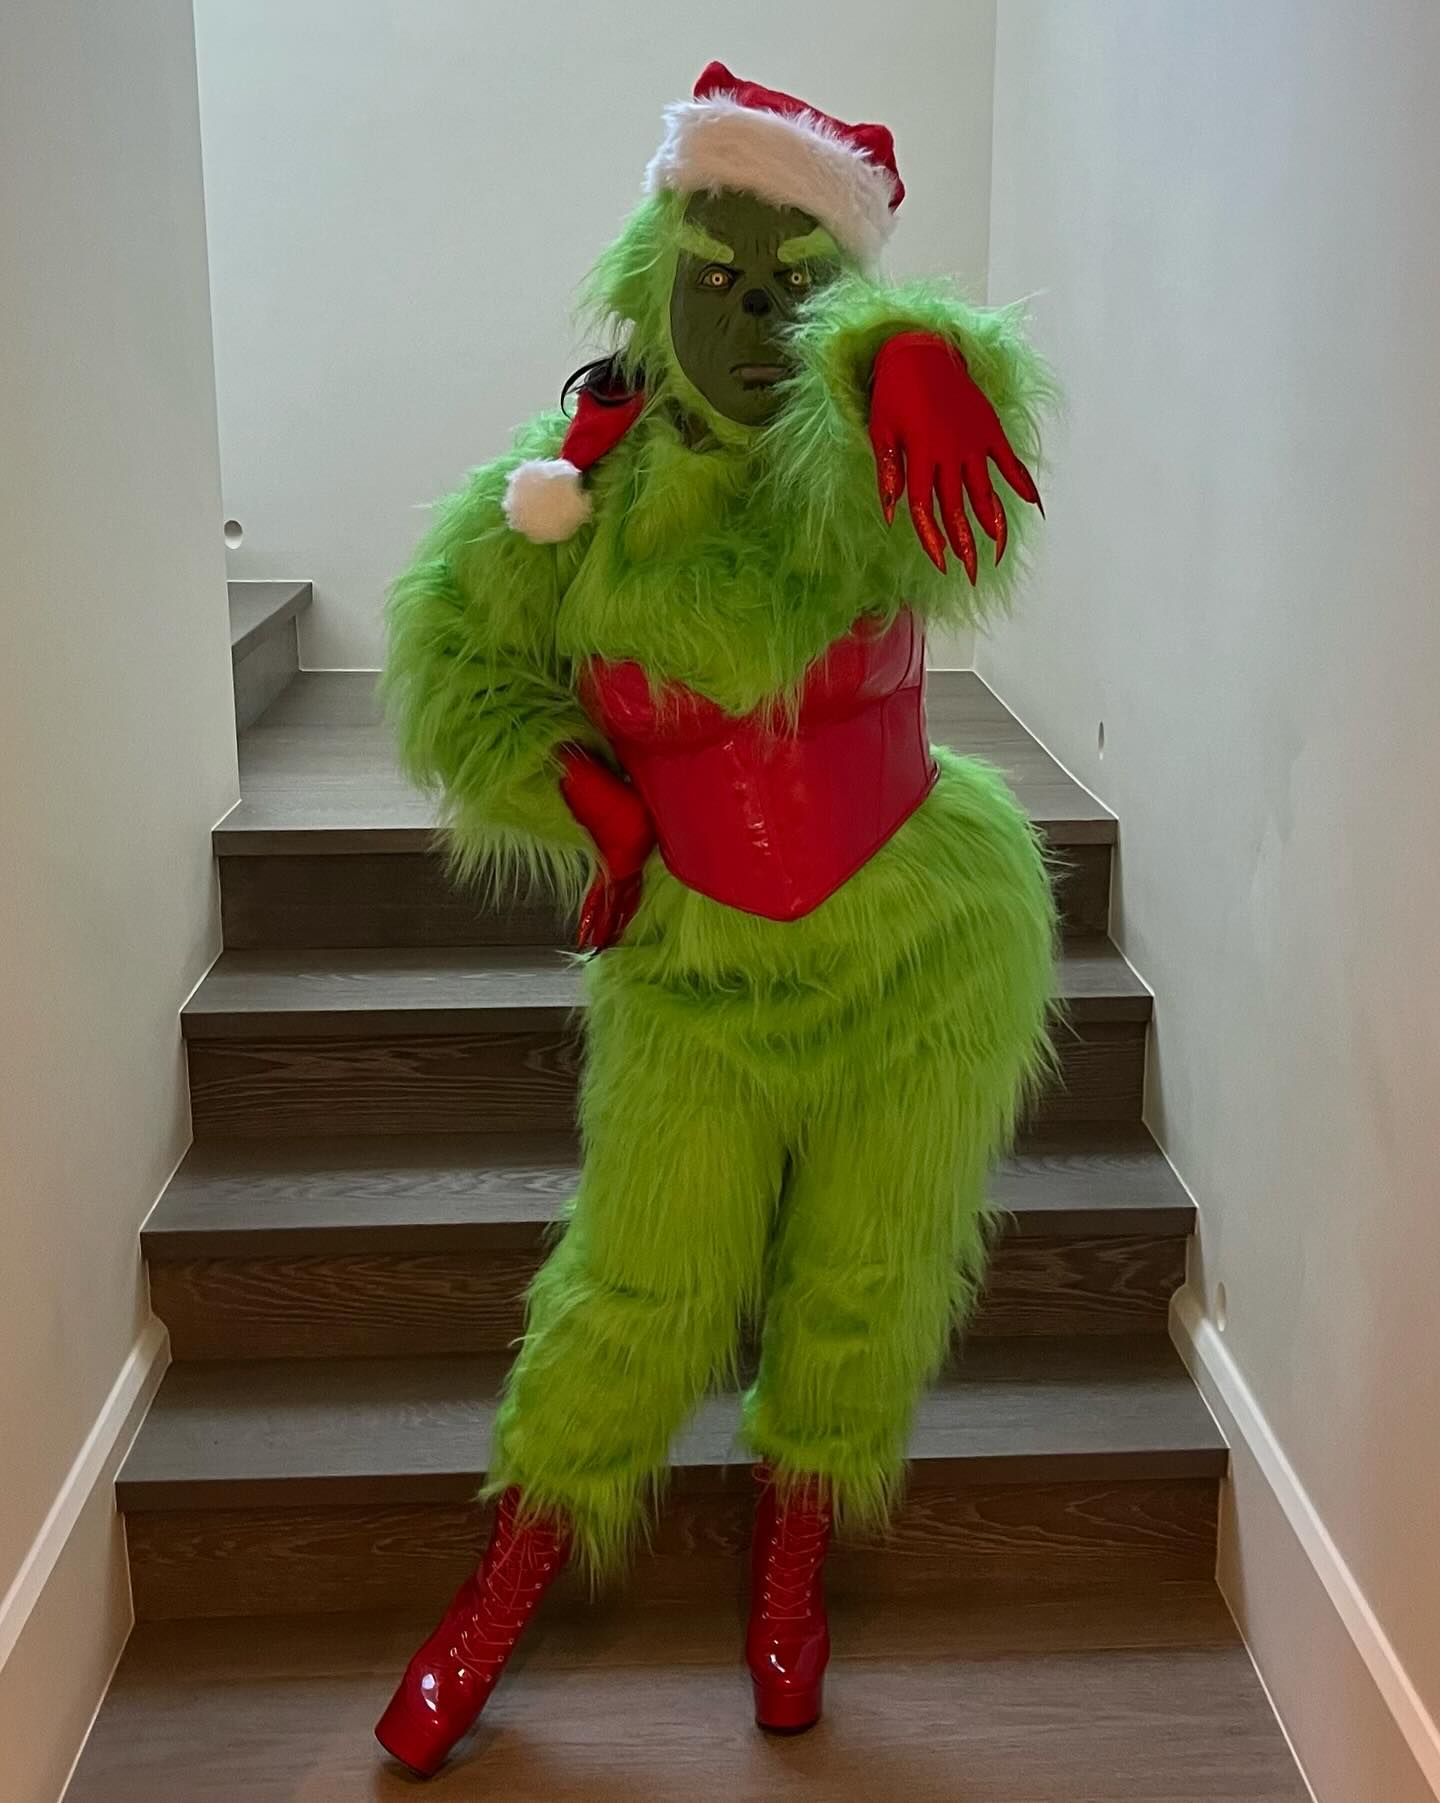 She transformed into The Grinch with her furry green costume